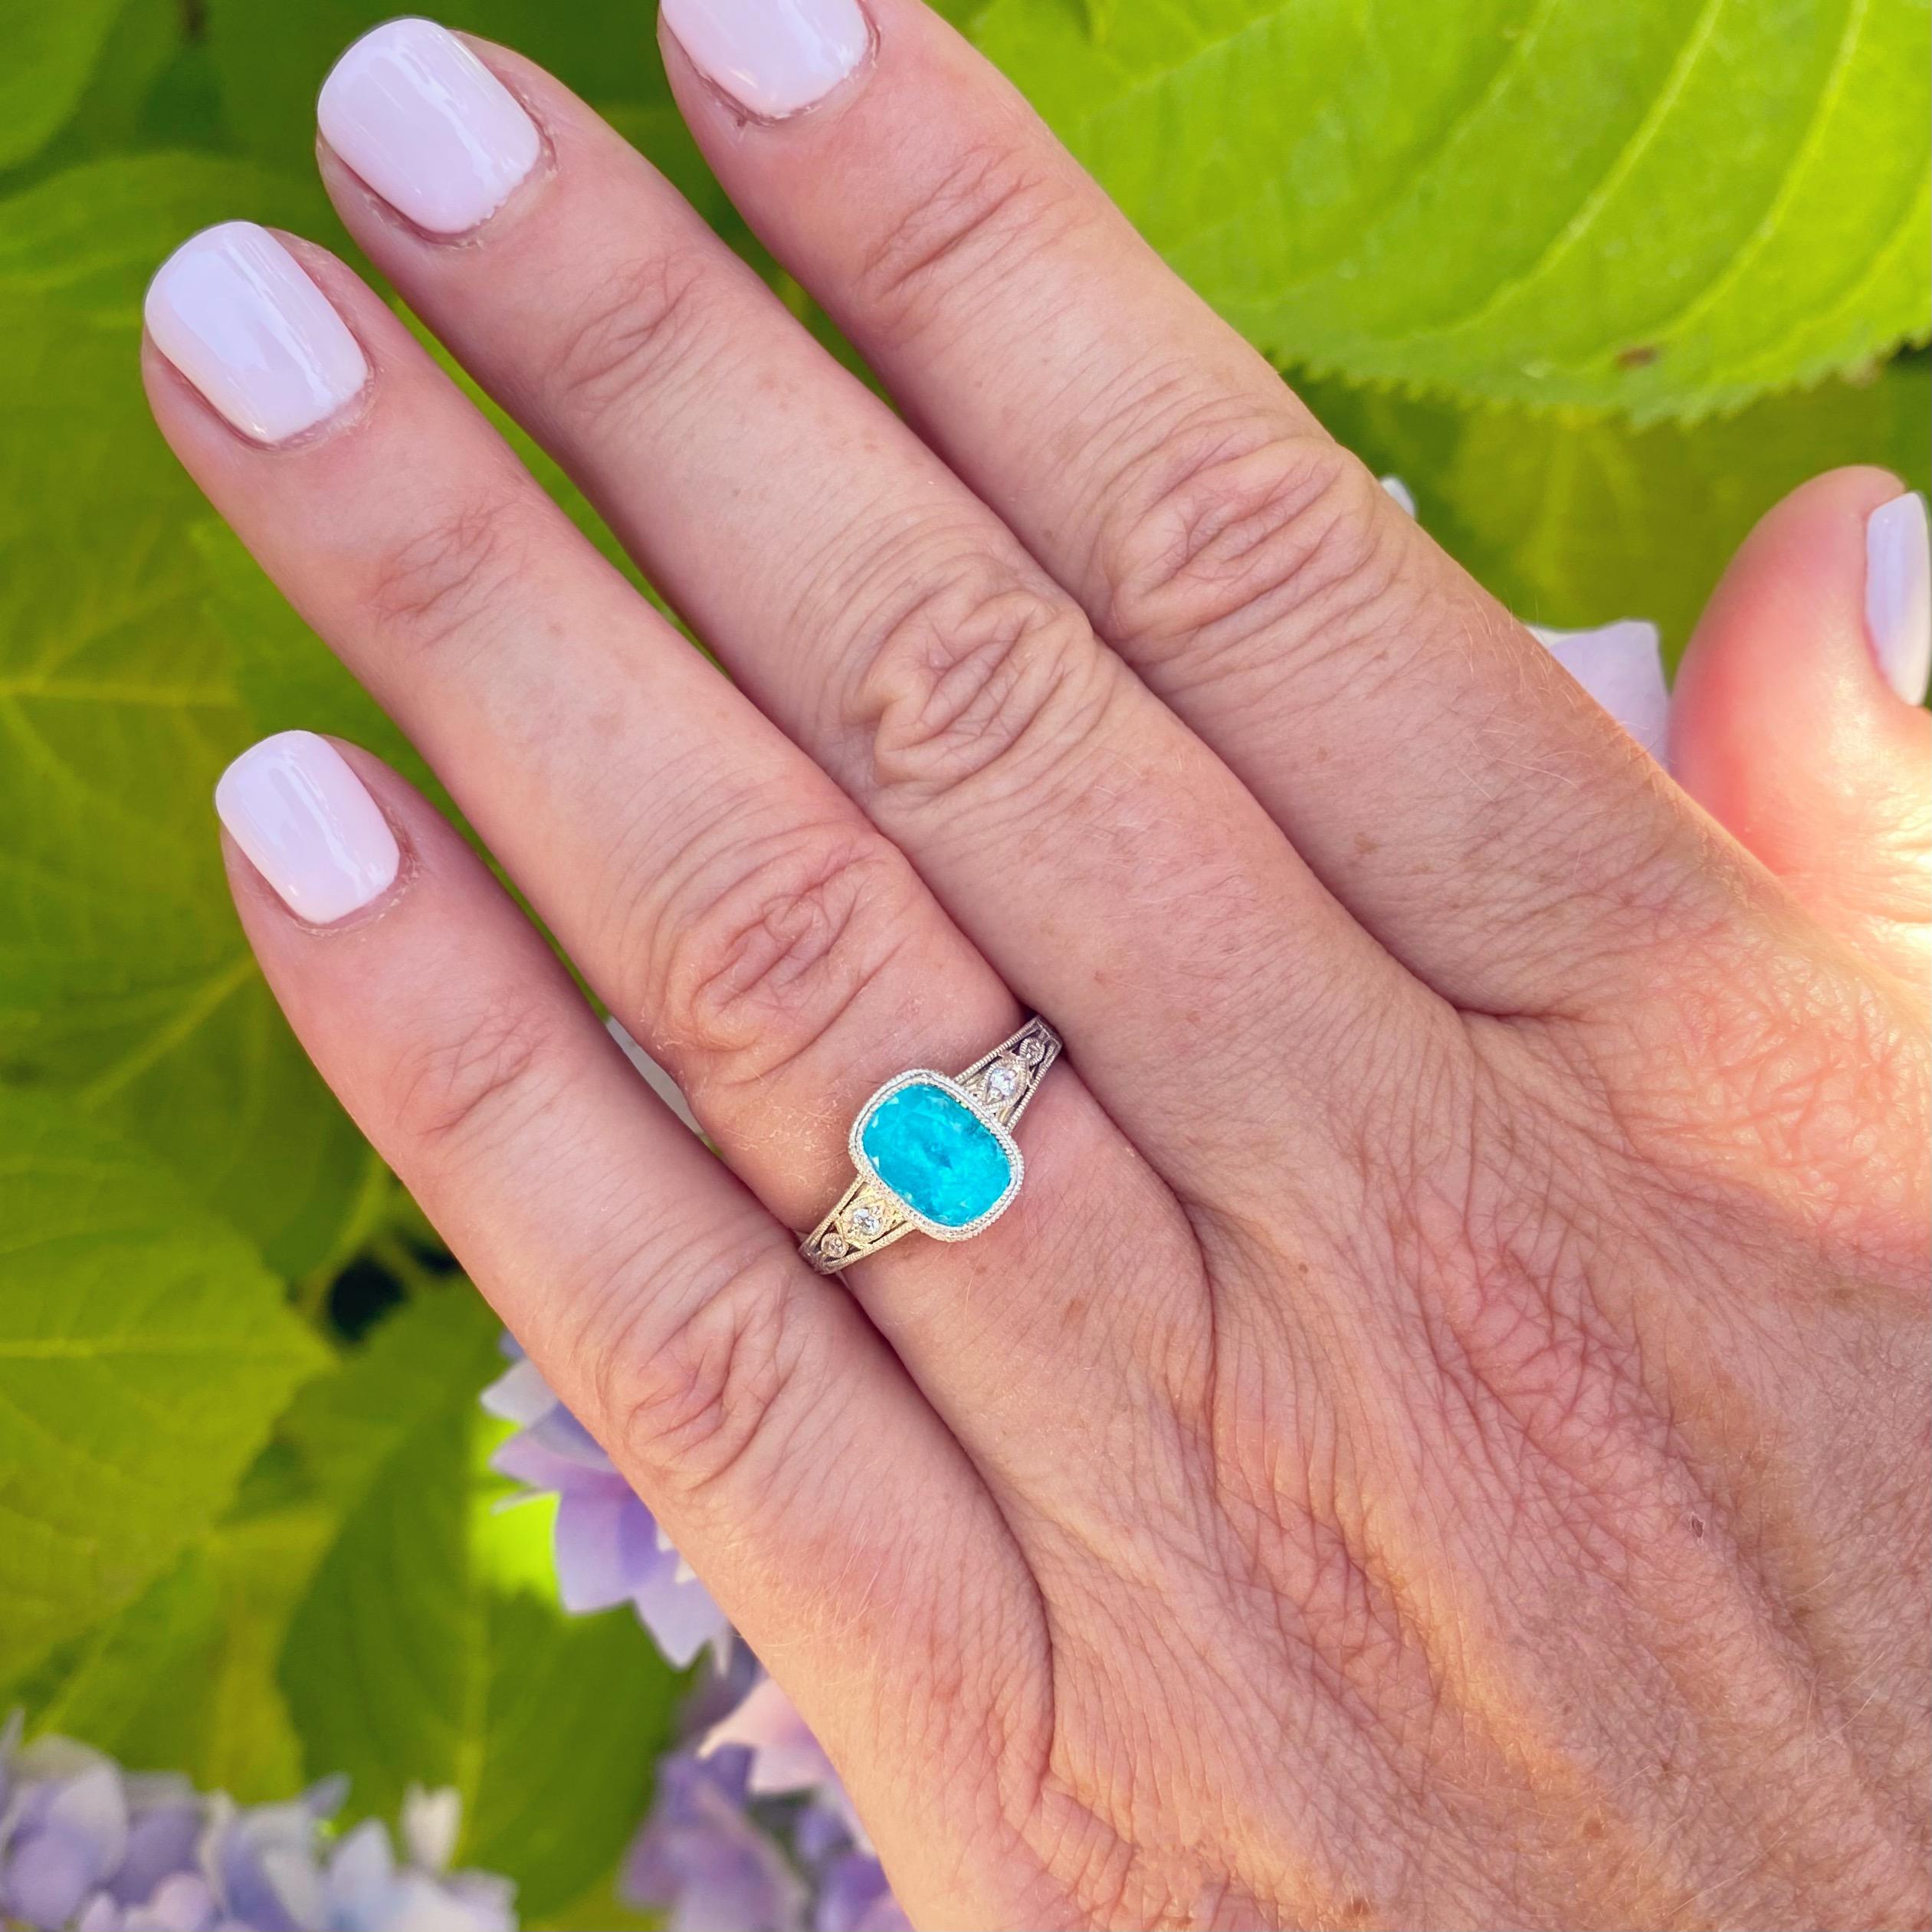 A true one of a kind! This electric green-blue Cushion Cut Paraiba Tourmaline is bezel set in an absolutely gorgeous Art Deco inspired platinum ring. The 1.63 carat Paraiba is accompanied by a GIA Tourmaline gemstone report. The platinum ring is